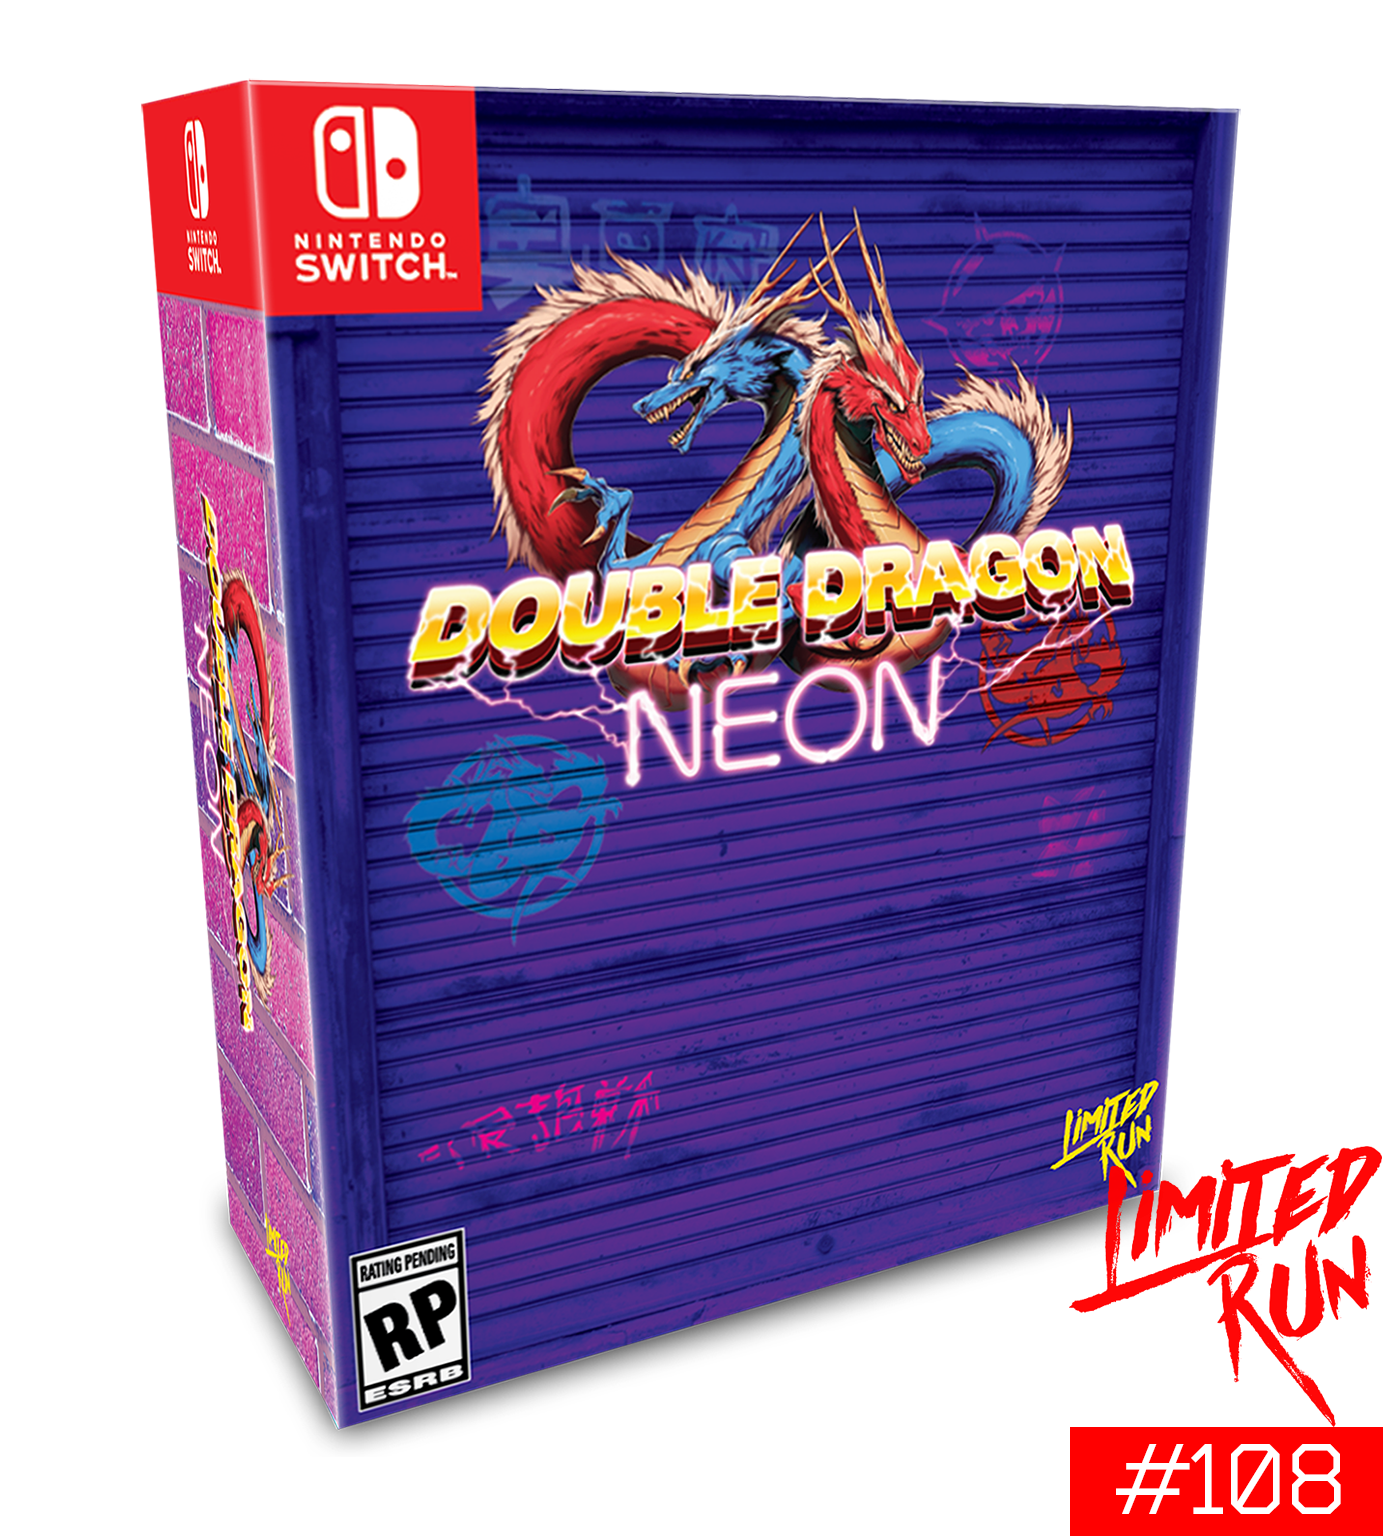  Double Dragon IV - Limited Run #107 - Nintendo Switch : Video  Games